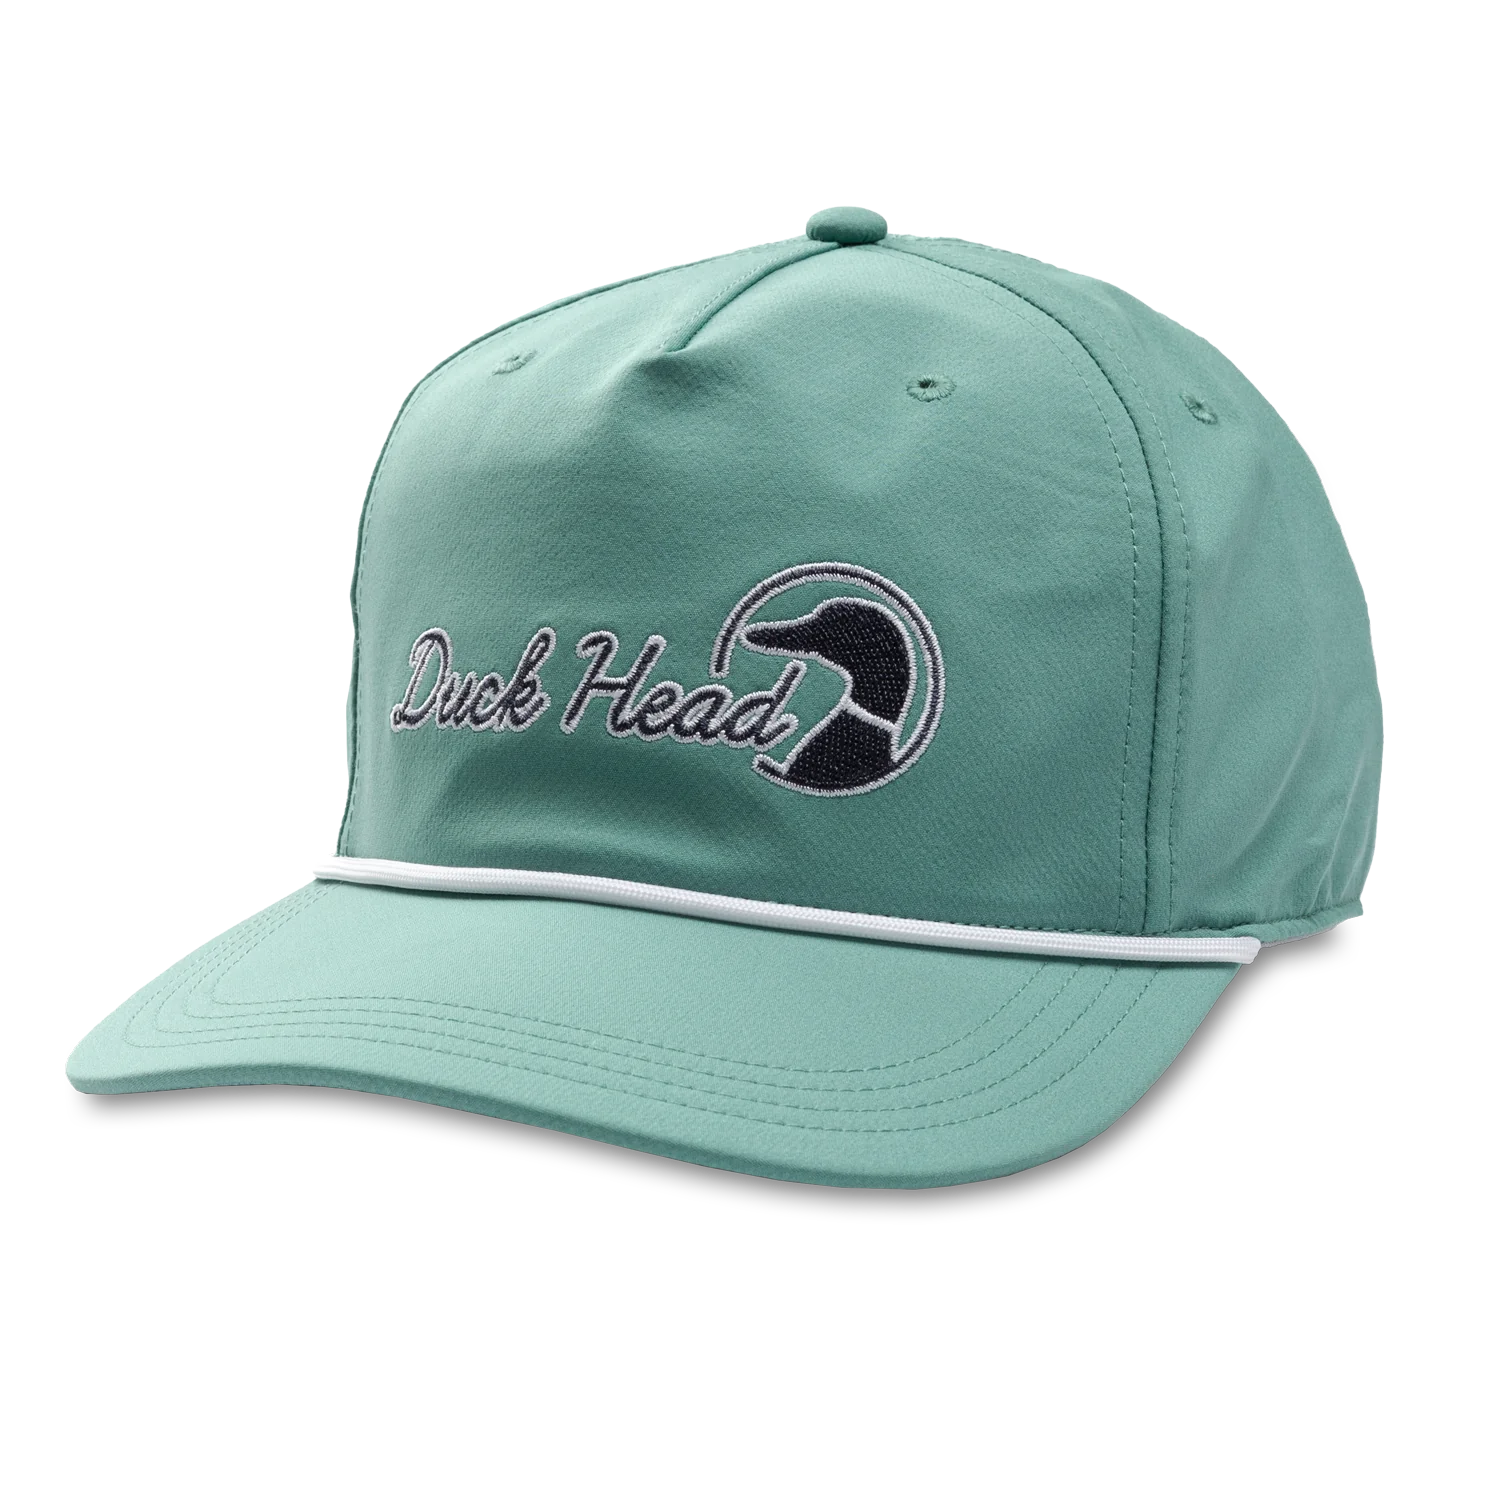 Duck Head Performance 5-Panel Unstructured Hat - Seaboard Green